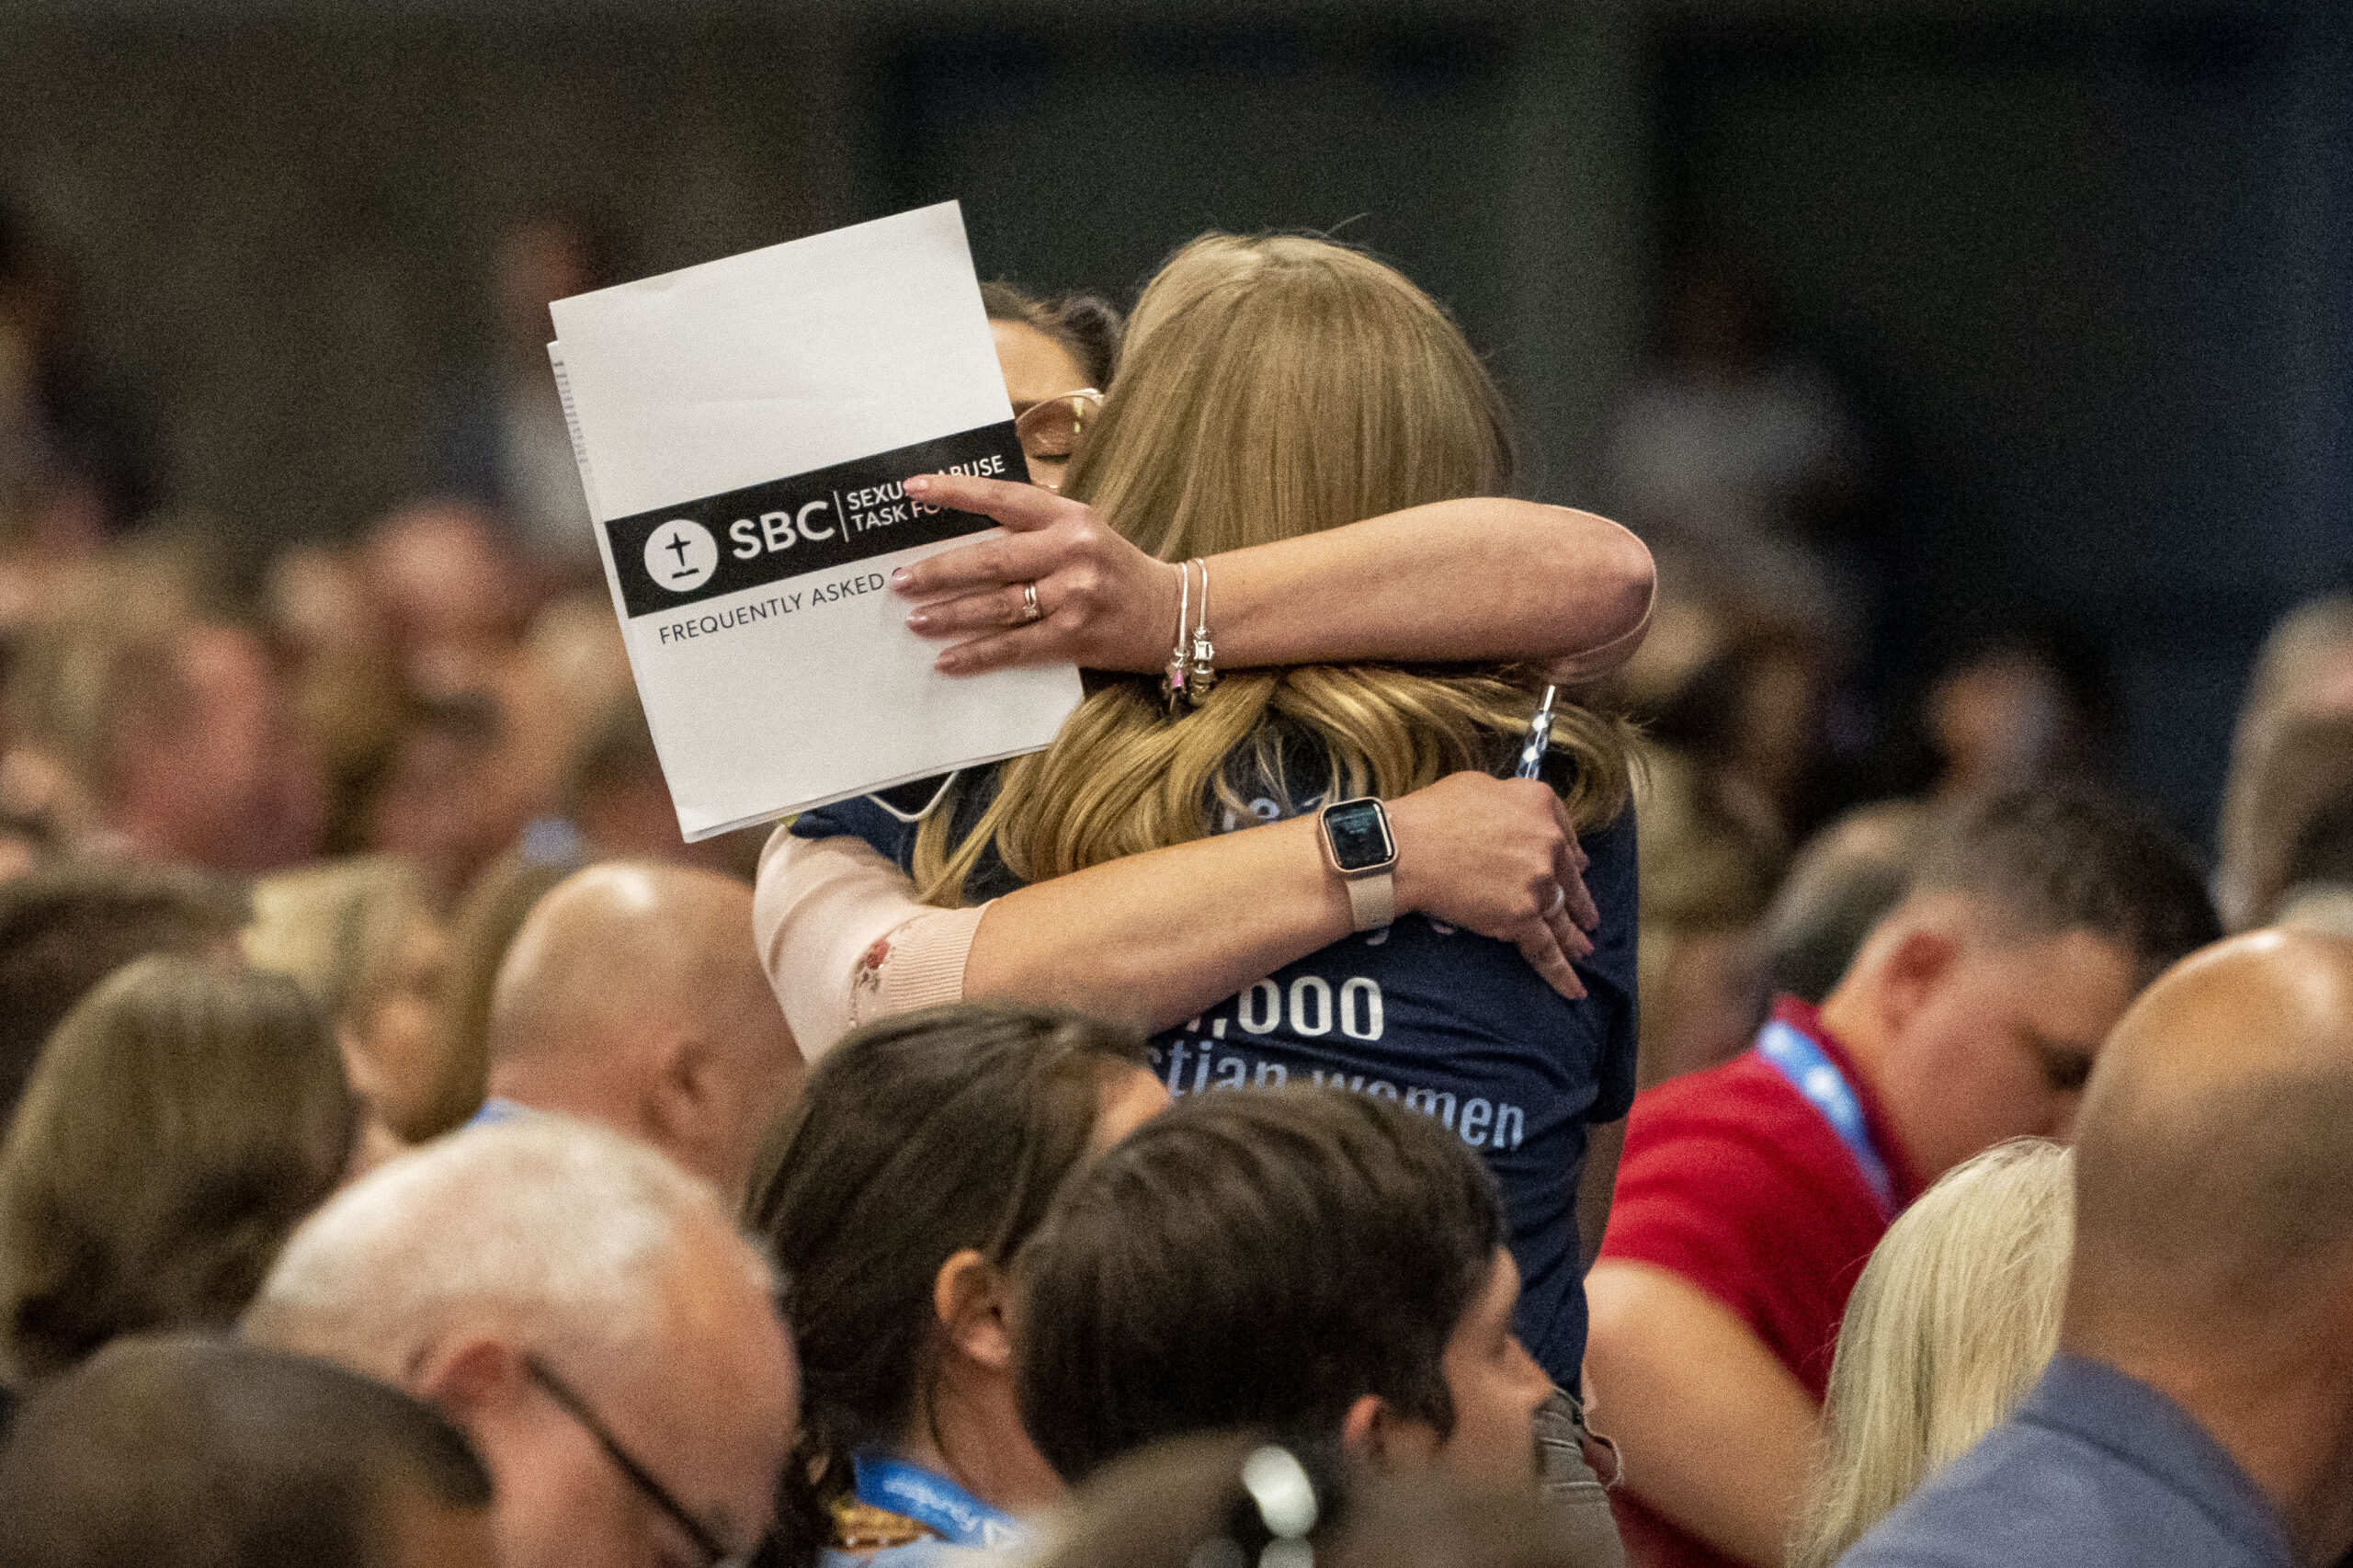 People celebrate the passing of the second recommendation from the Sexual Abuse Task Force during the Southern Baptist Convention, held at the Anaheim Convention Center in Anaheim, California, on Tuesday, June 14, 2022. Photo by Justin L. Stewart/Religion News Service